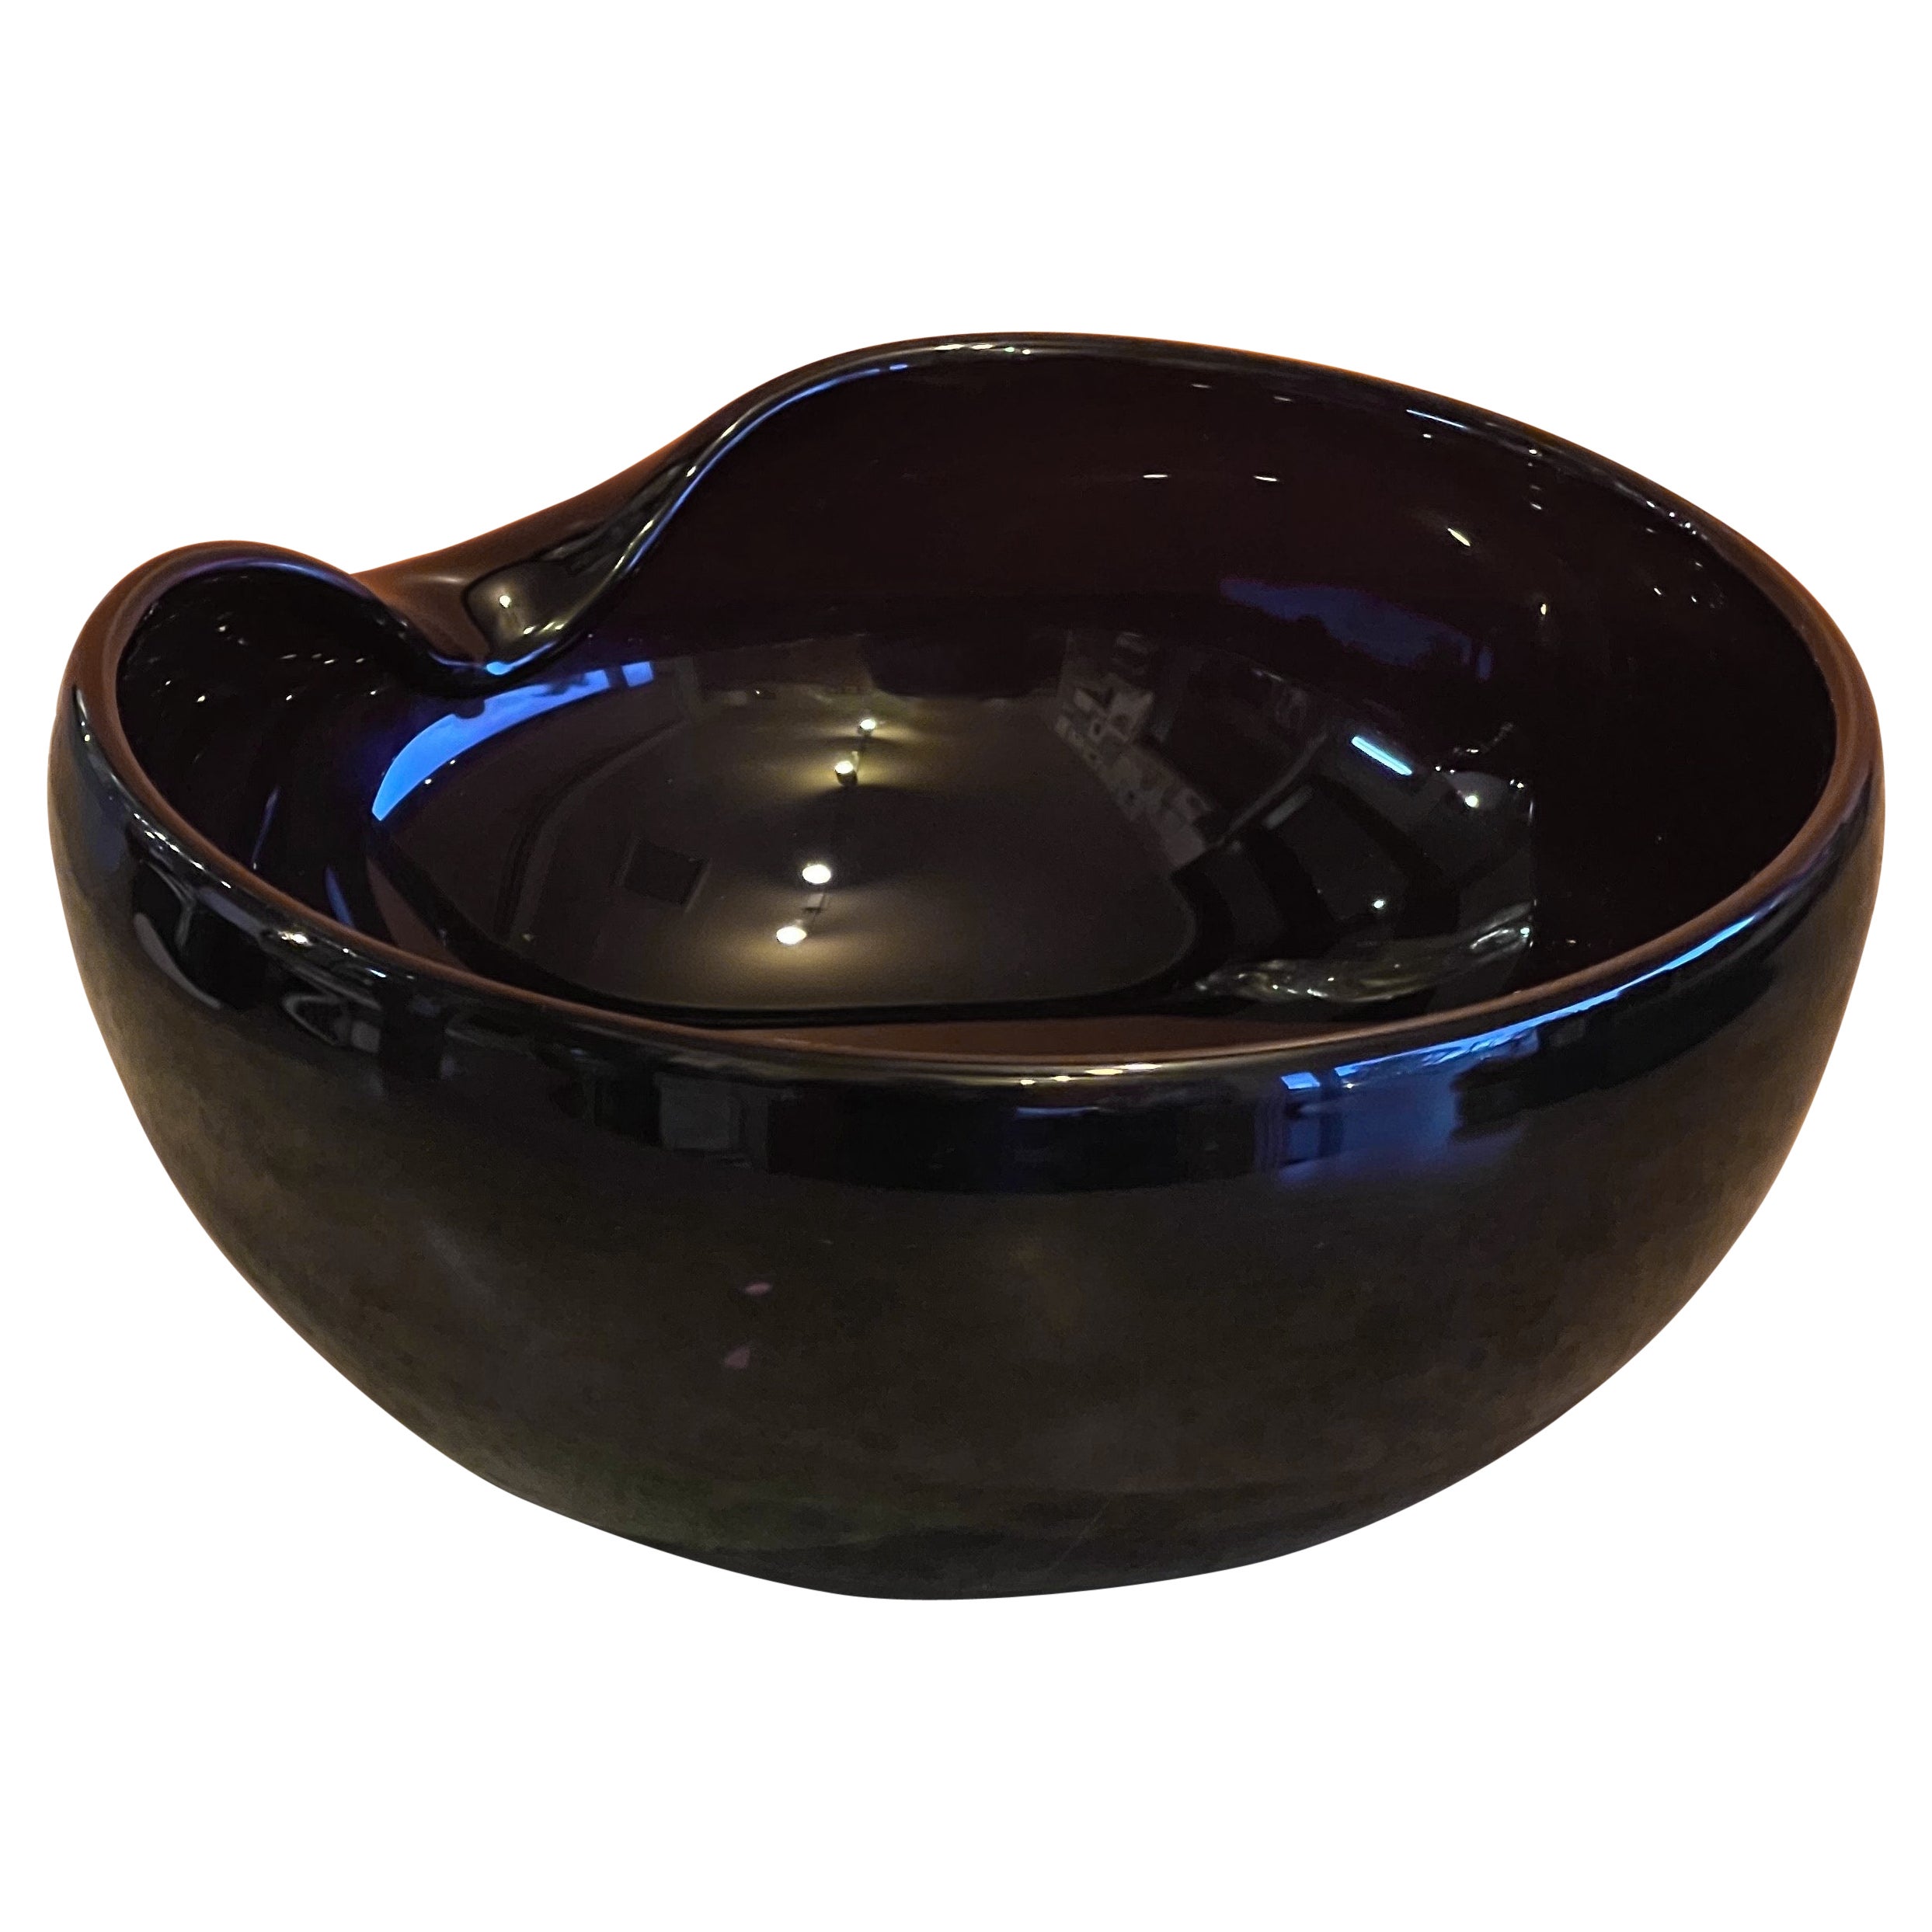 Black Thumbprint Art Glass Centerpiece Bowl by Elsa Peretti for Tiffany and Co.